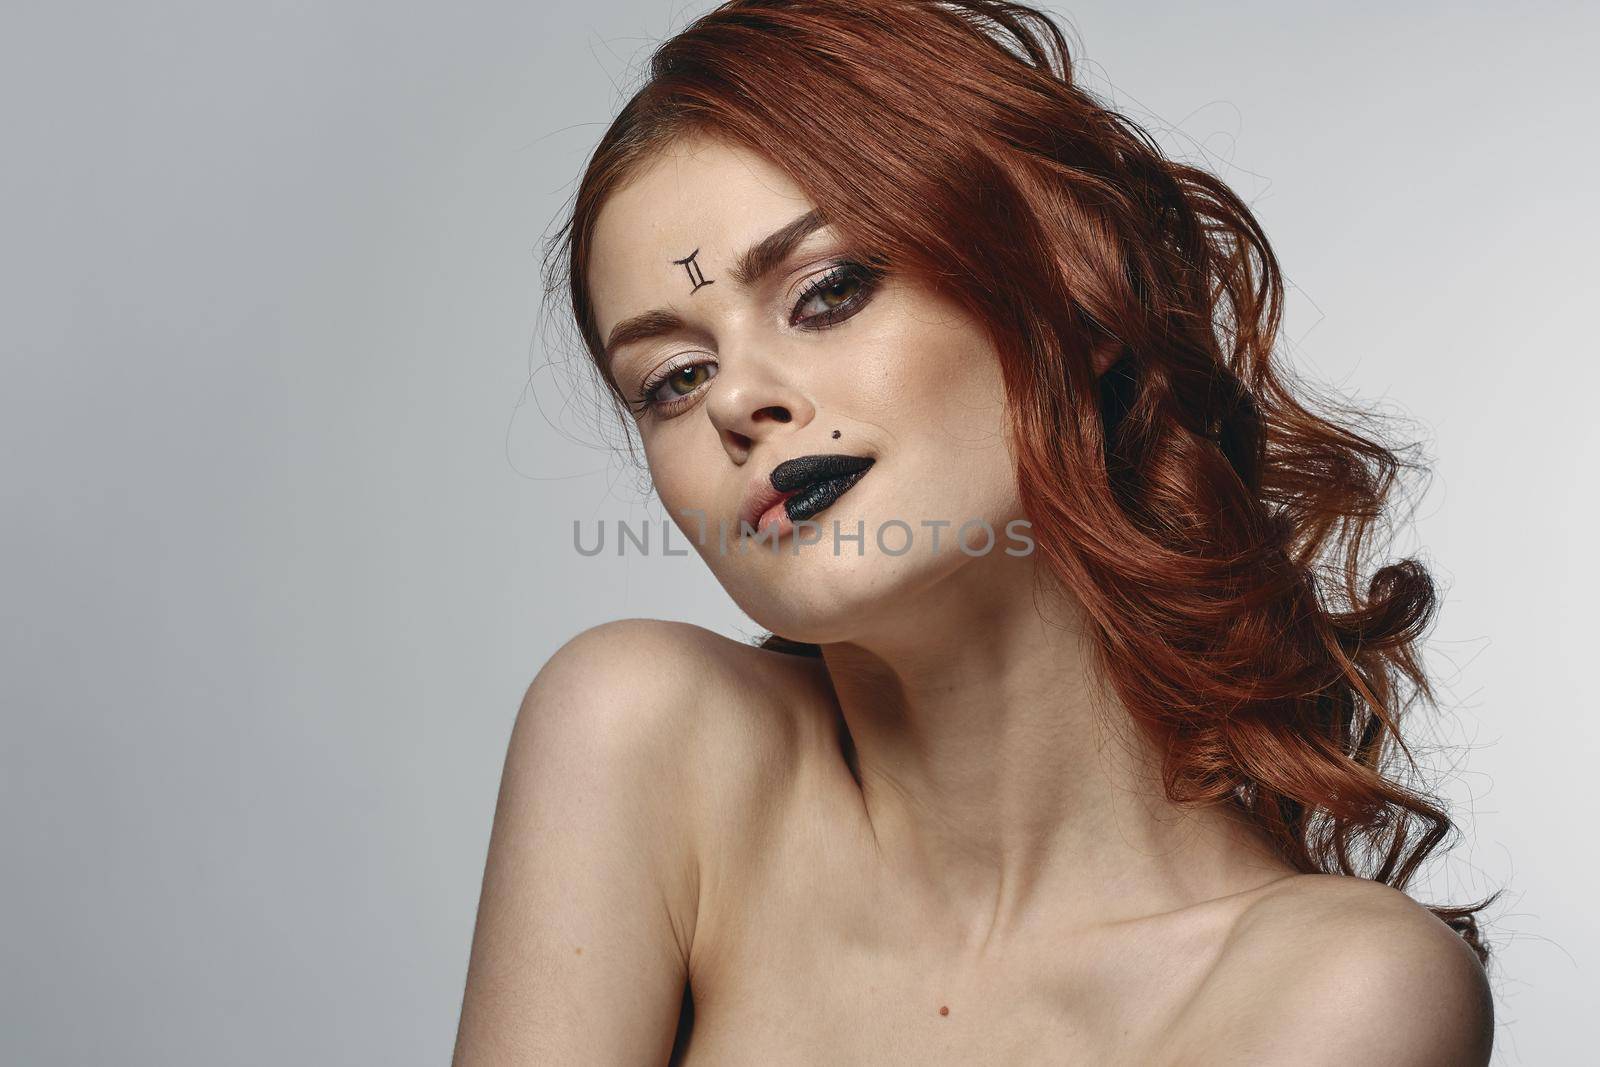 red-haired woman naked shoulders zodiac sign on face gemini. High quality photo